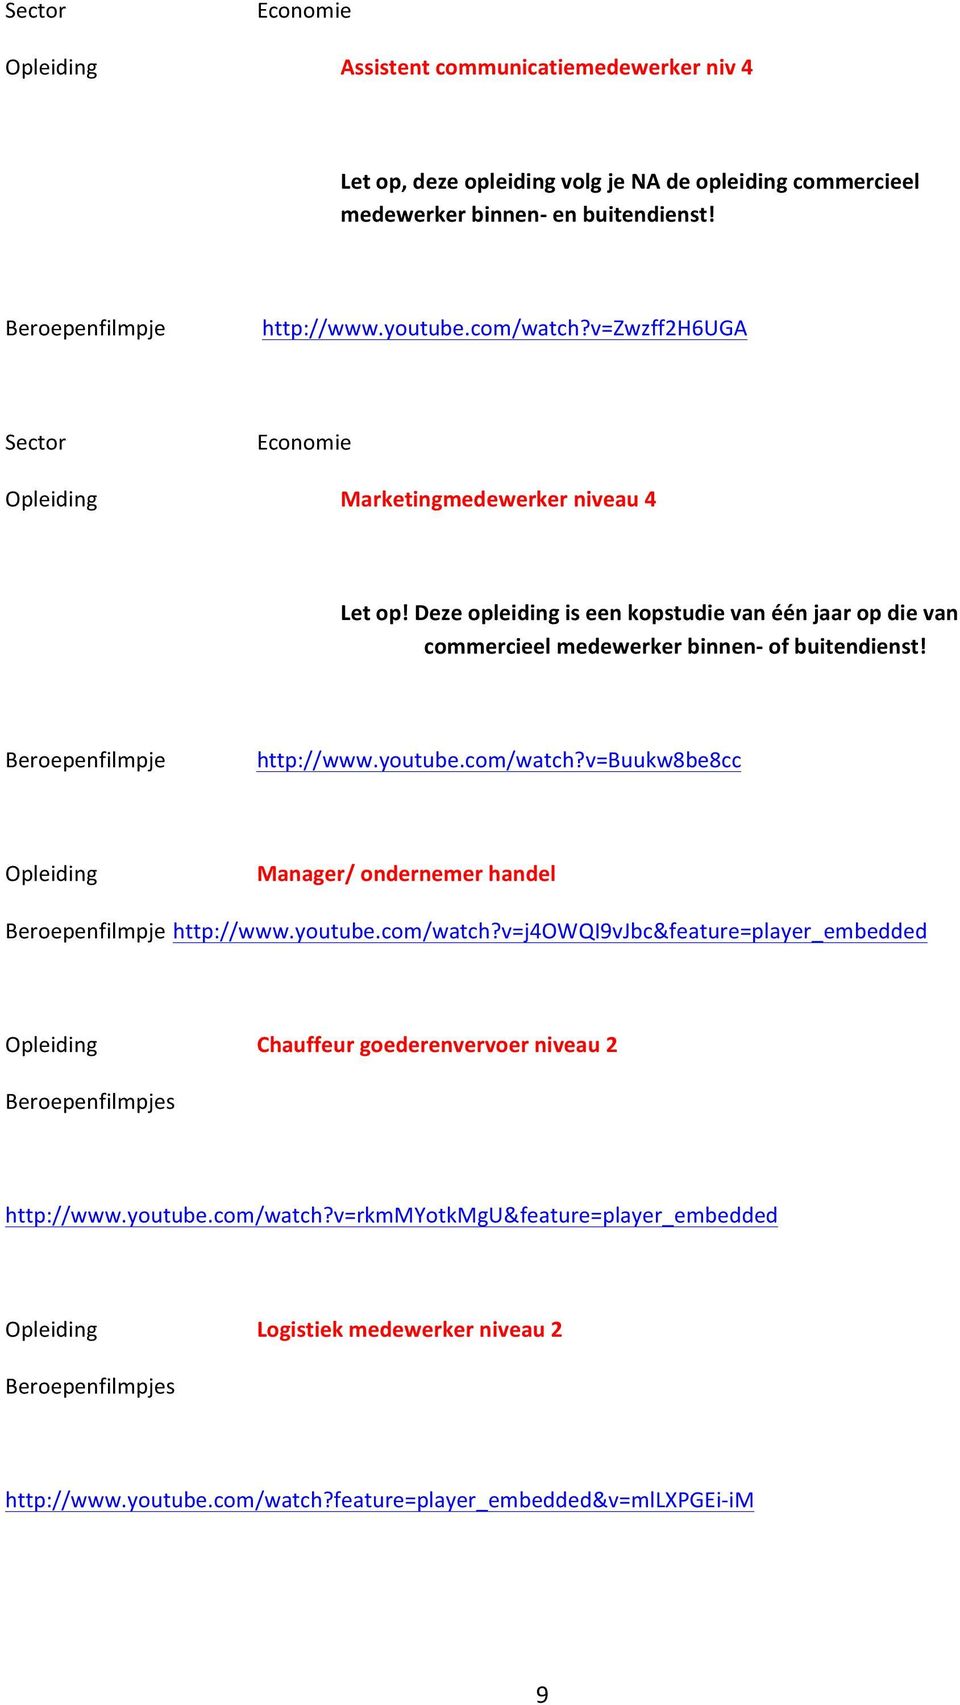 http://www.youtube.com/watch?v=buukw8be8cc Manager/ ondernemer handel http://www.youtube.com/watch?v=j4owqi9vjbc&feature=player_embedded Chauffeur goederenvervoer niveau 2 s http://www.